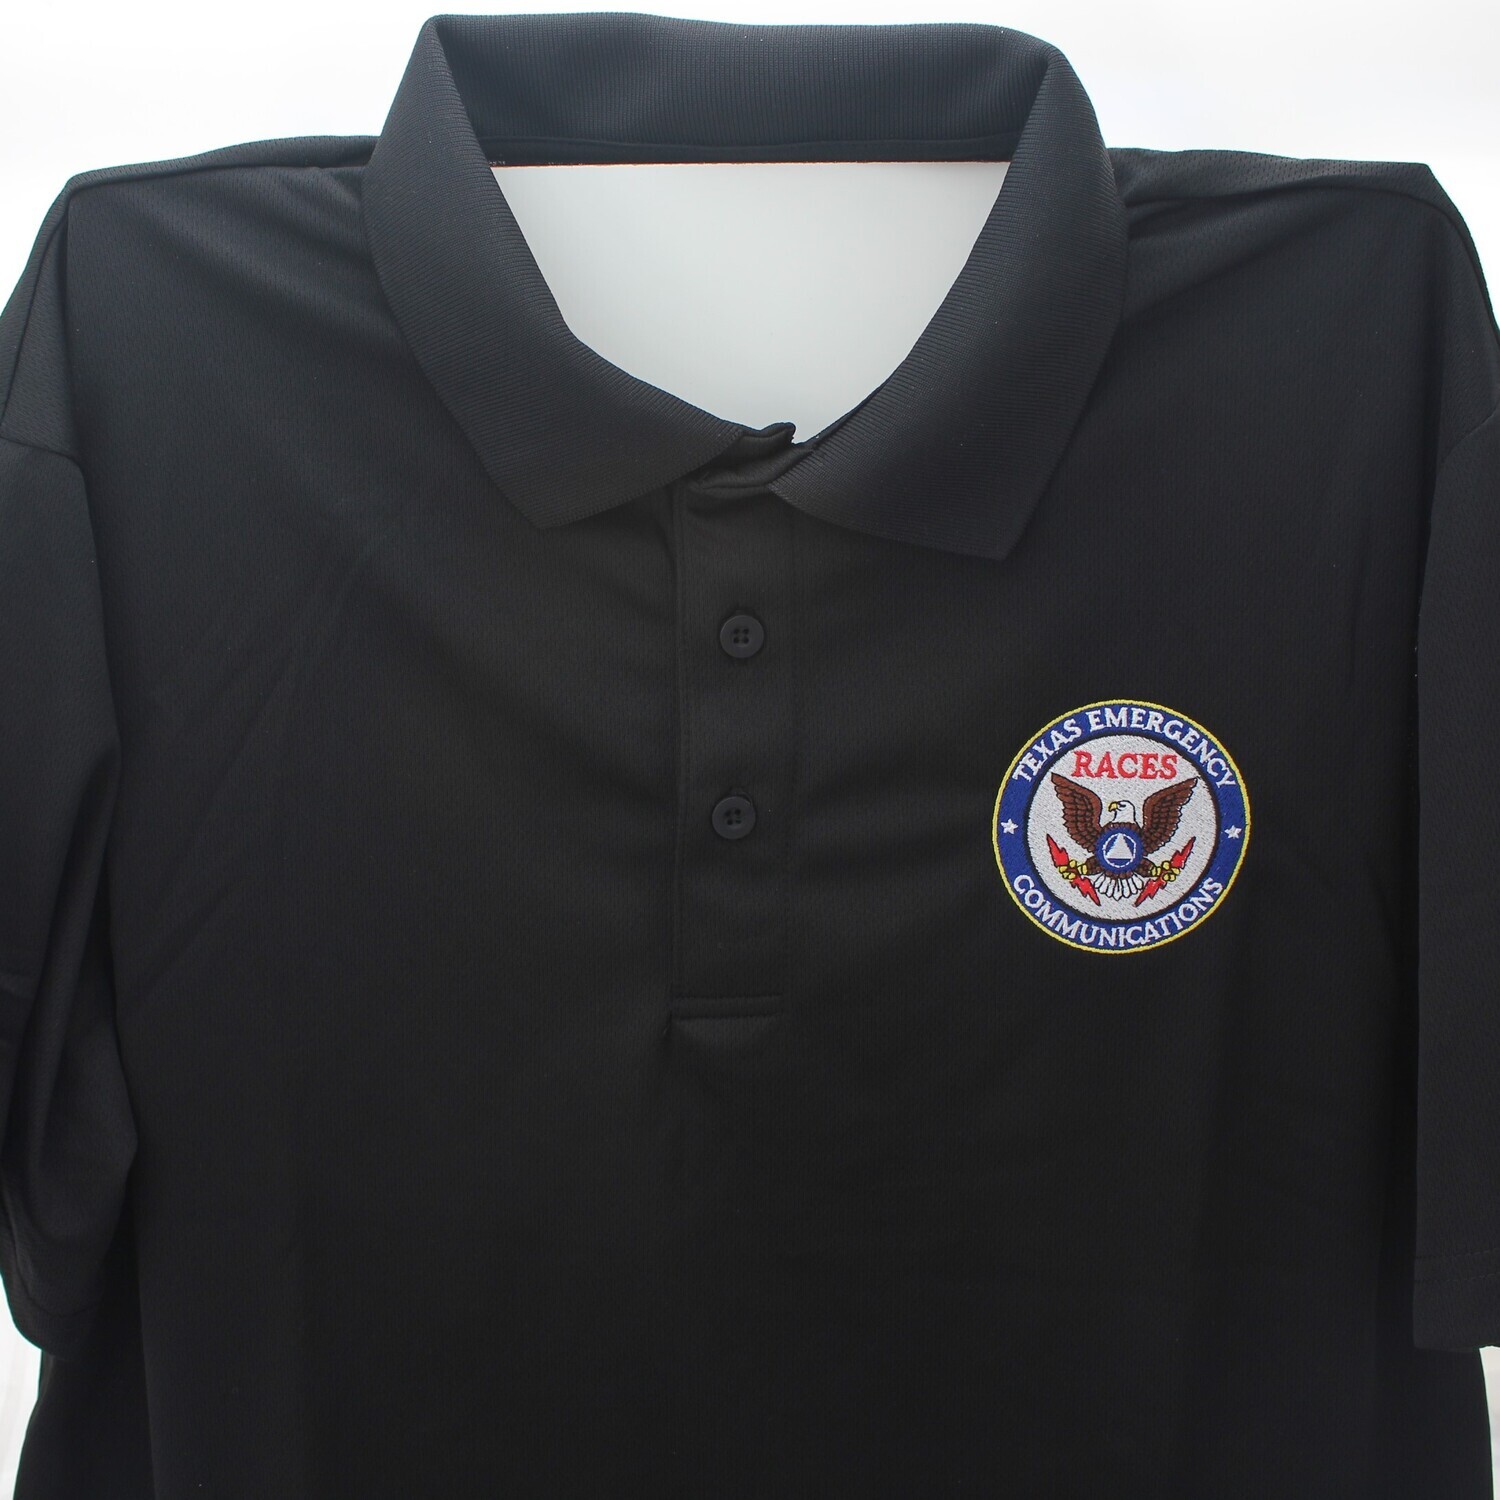 TEXAS RACES POLO STYLE SHIRT FOR MEN AND WOMEN - CODE REQUIRED TO ORDER